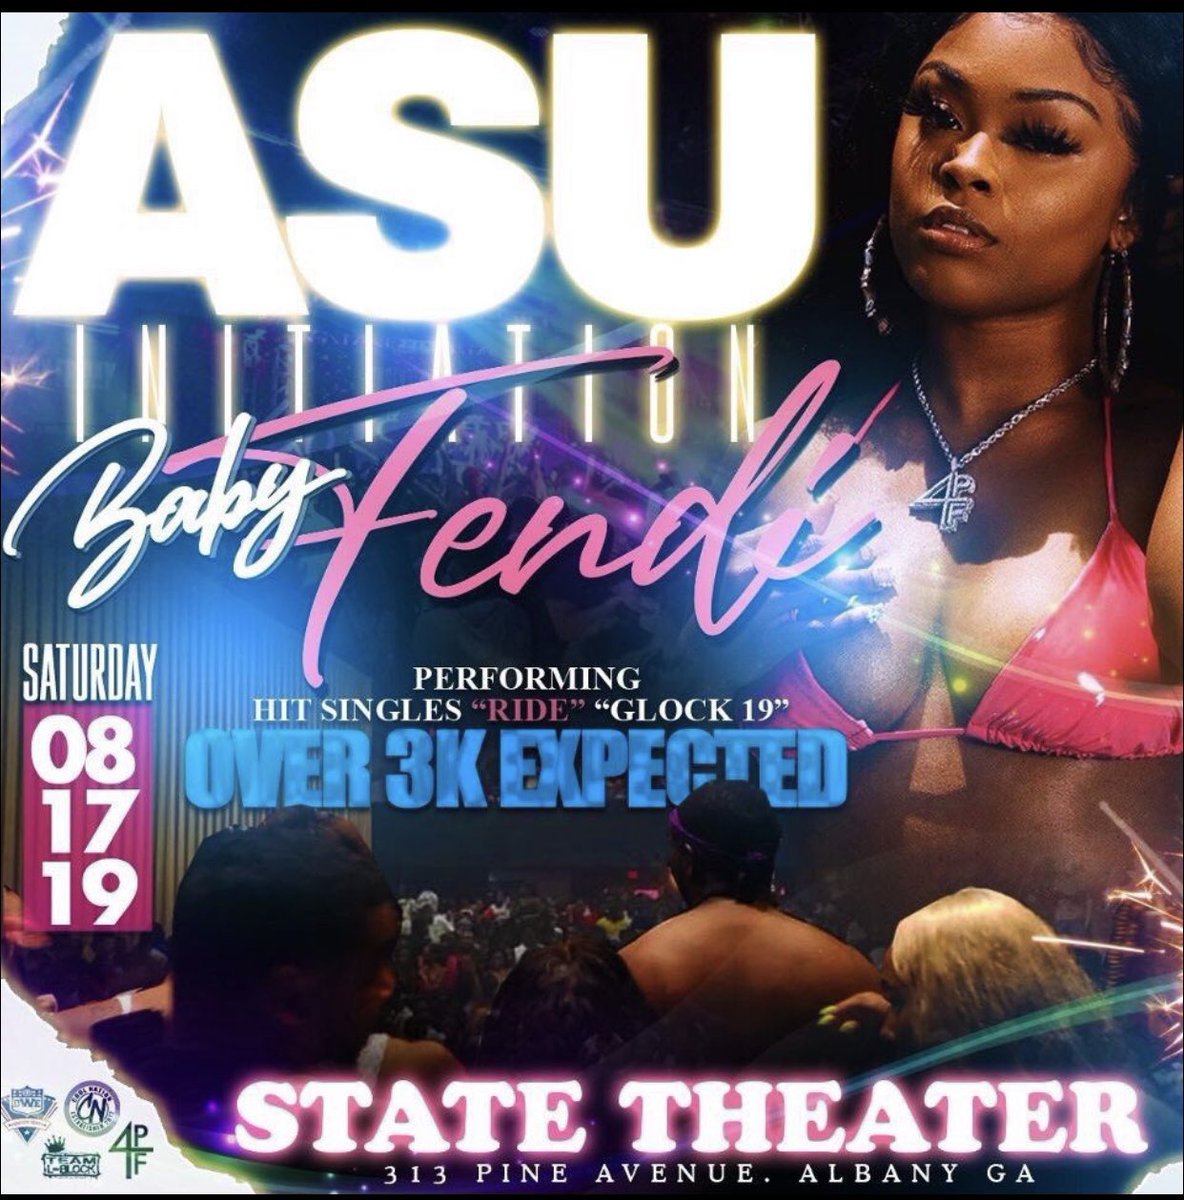 August 17th @statetheatre #DERTYWORKENT 💙❤️party about to be jumping 😝 MAKE SURE YALL BE THERE